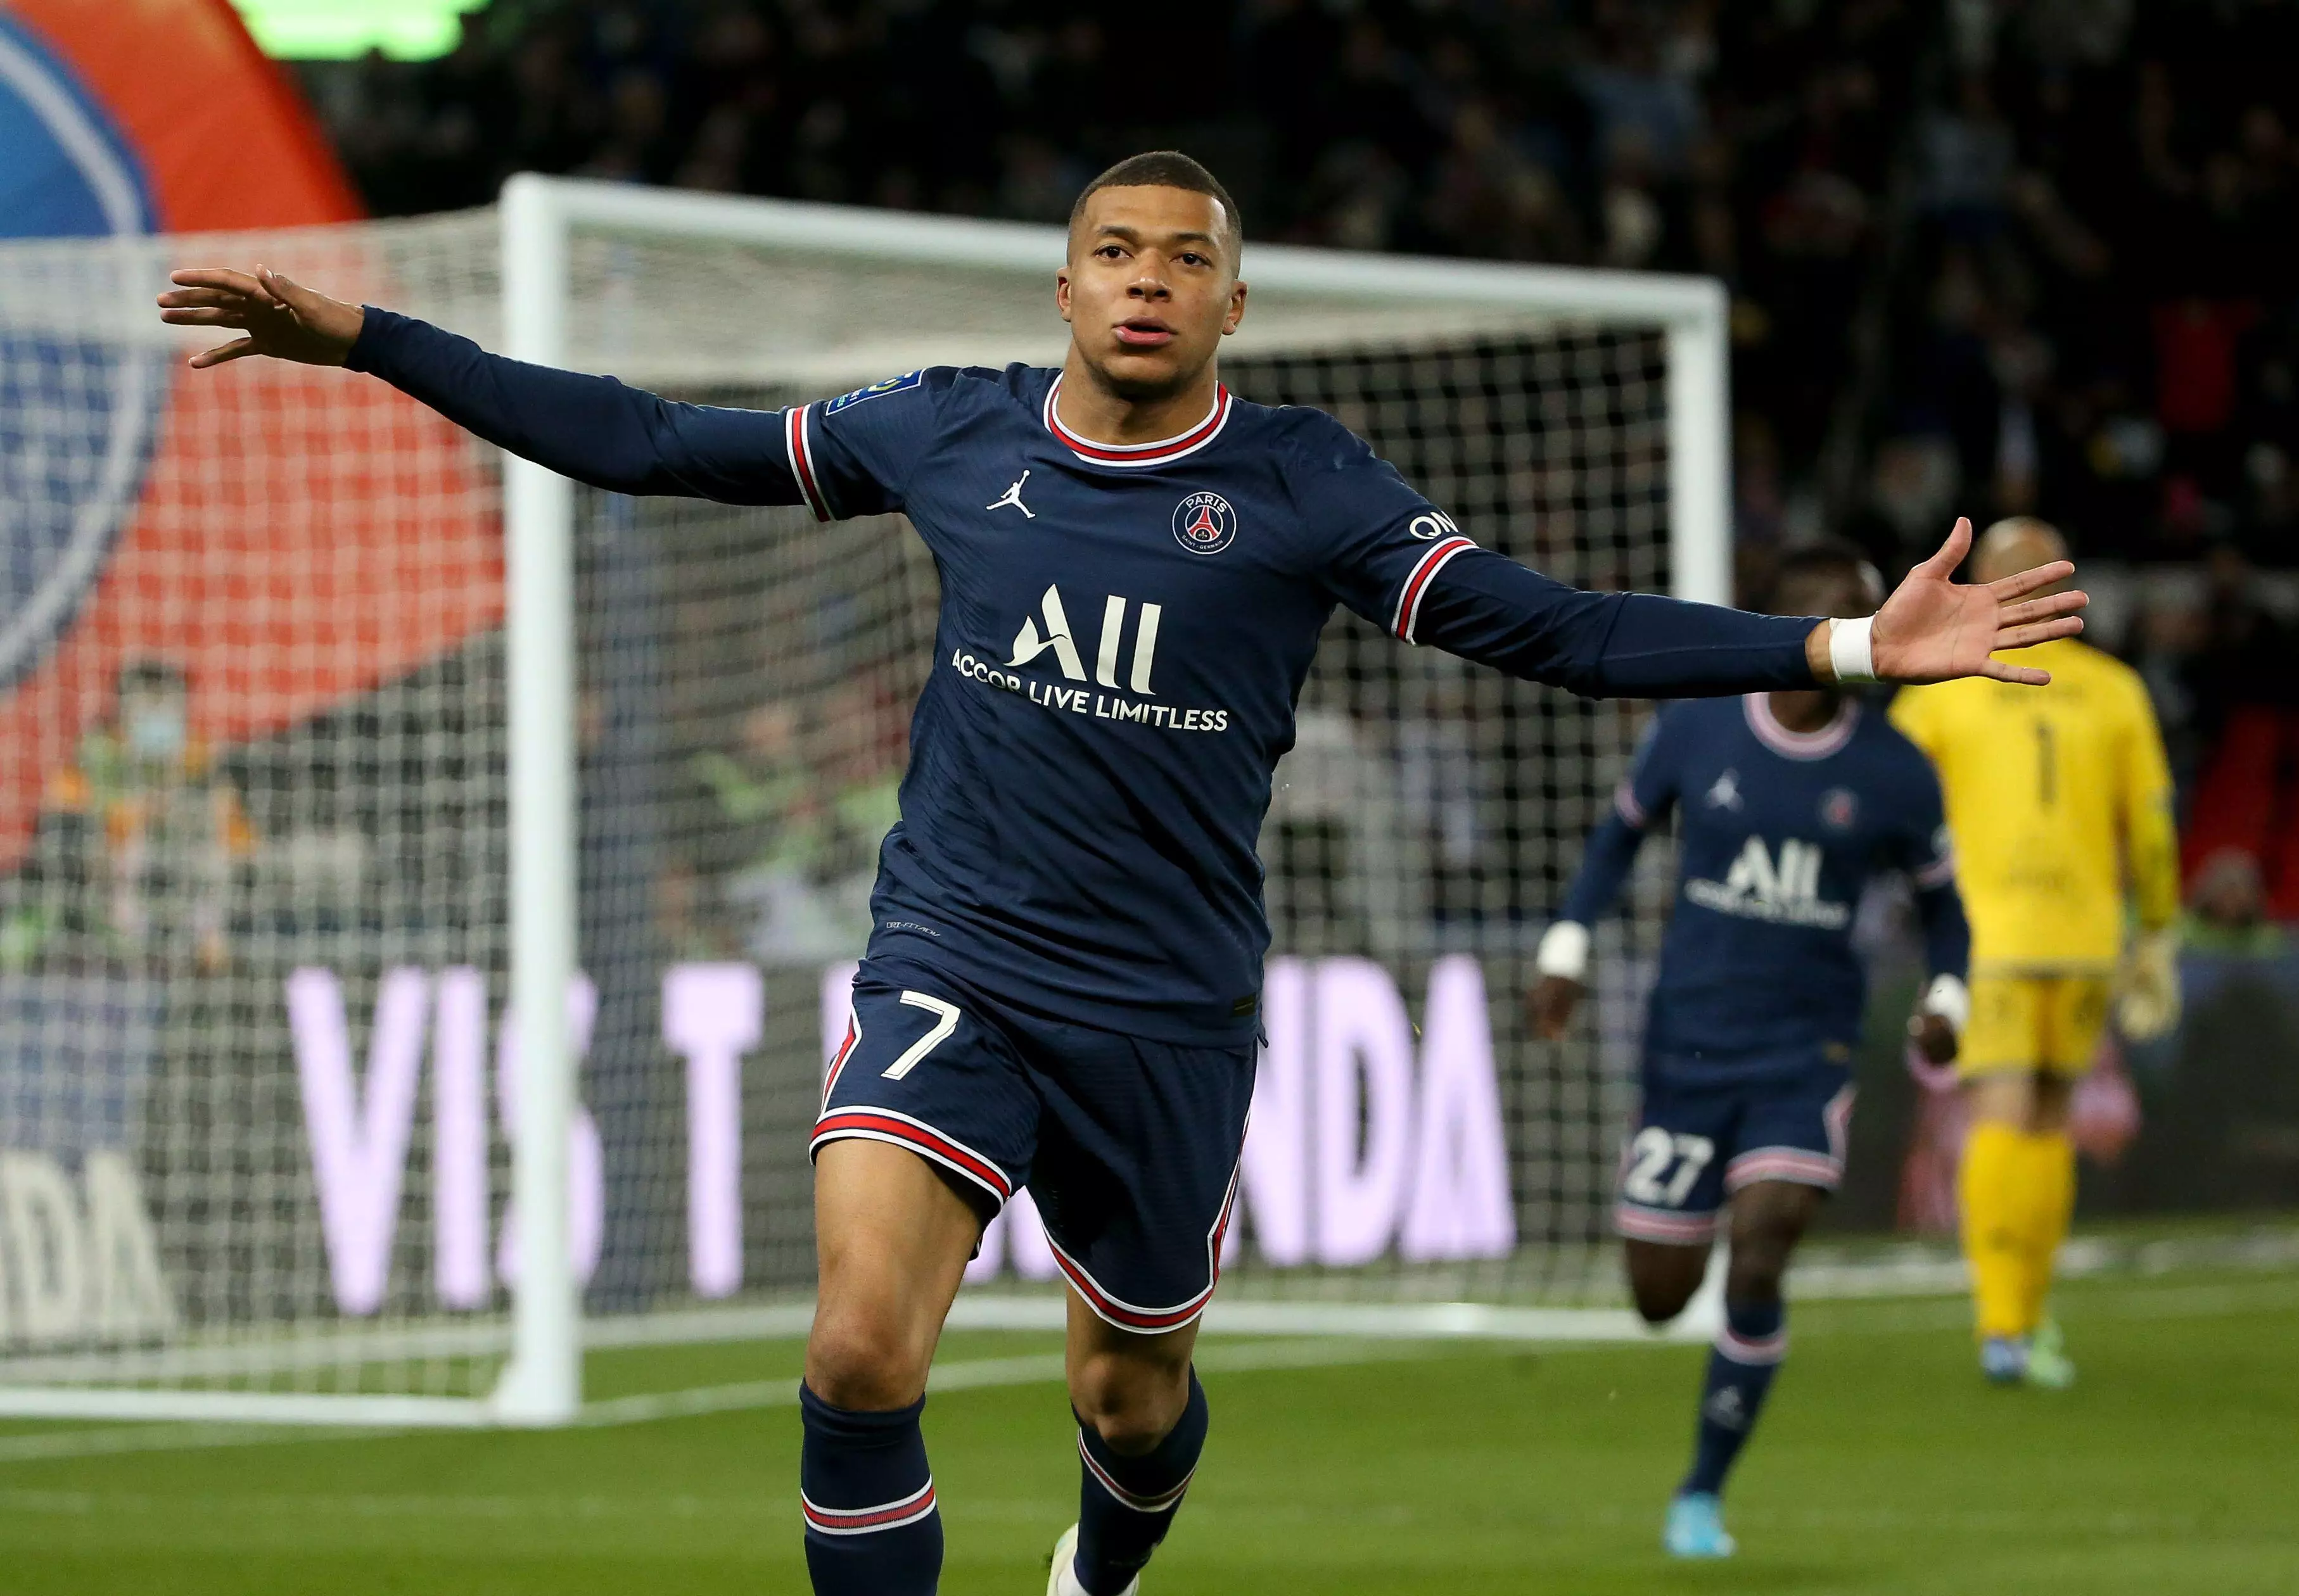 Barcelona have been linked with both Mbappe and Haaland (Image: PA)